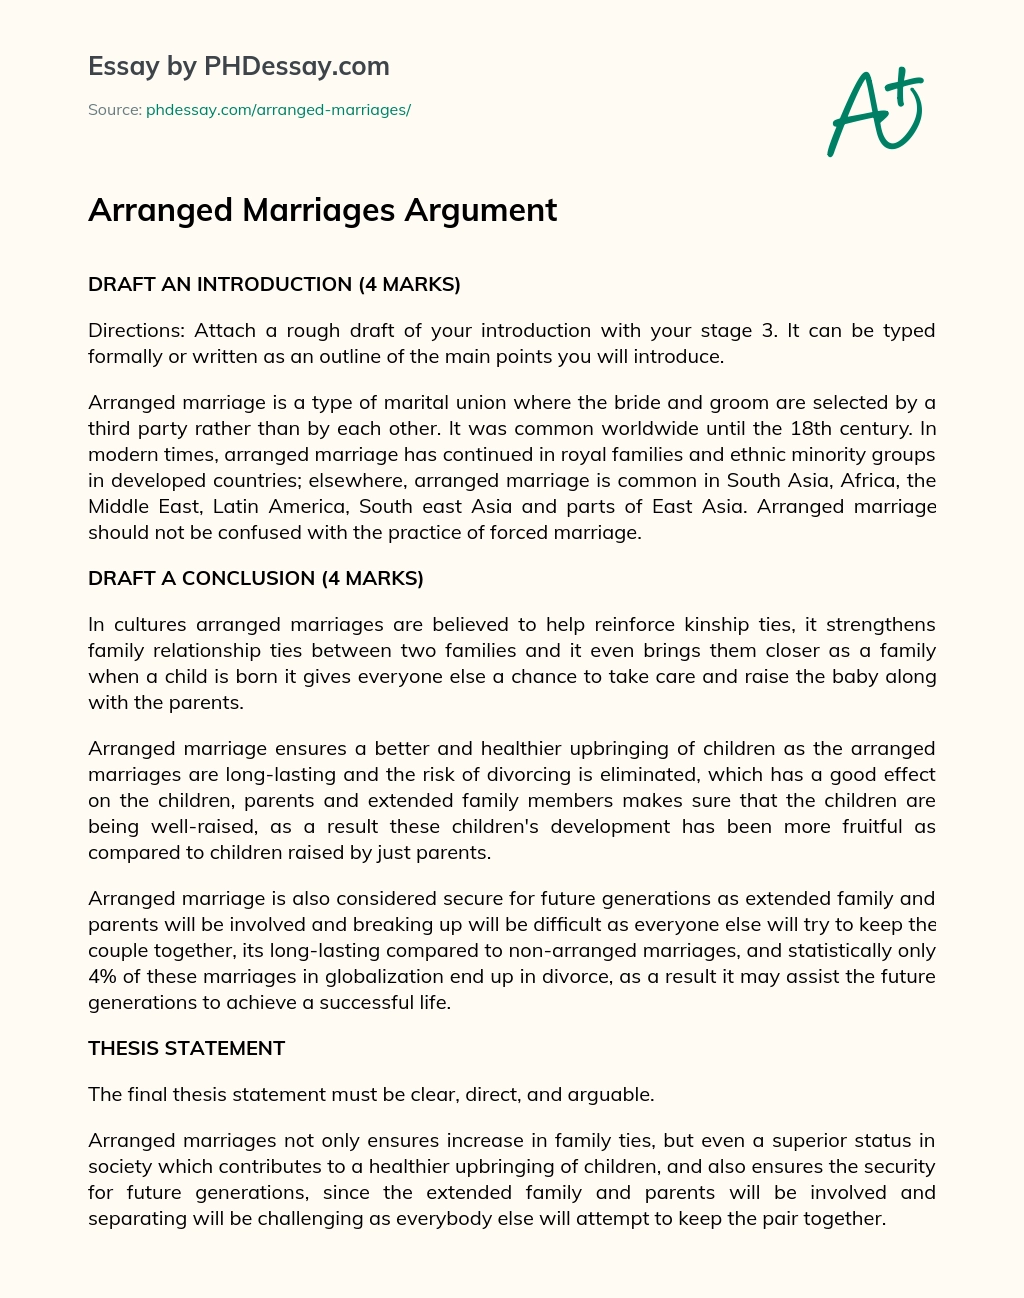 agree with arranged marriage essay